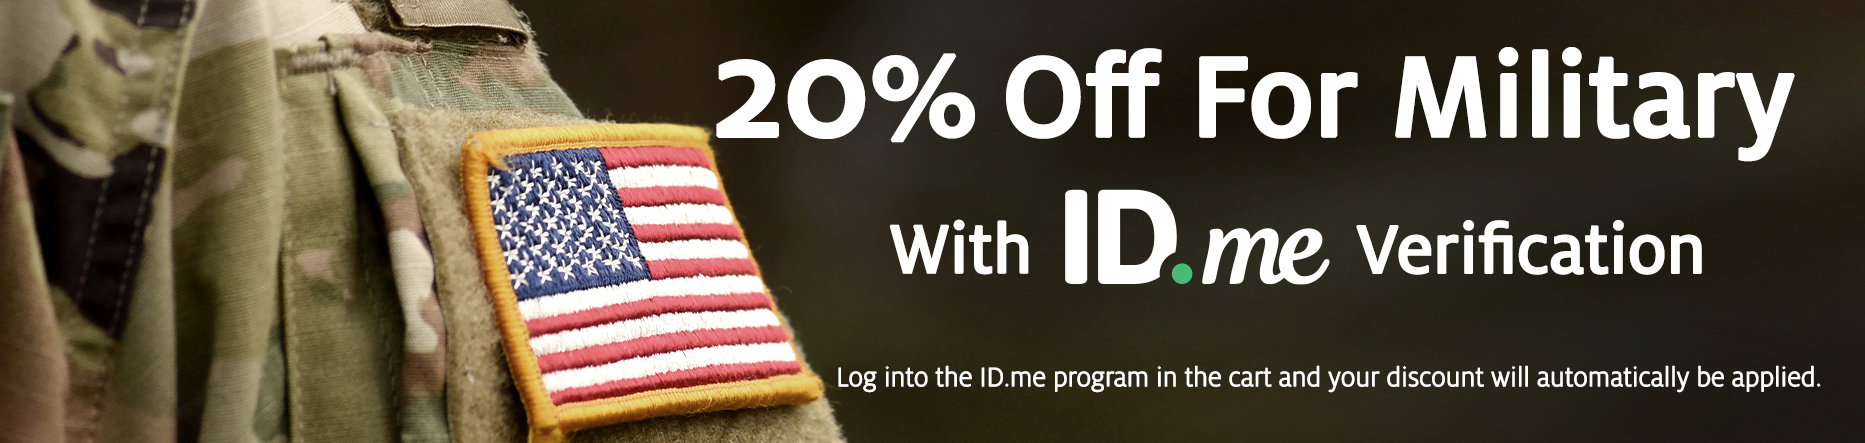 Military Discount 20% with ID.me